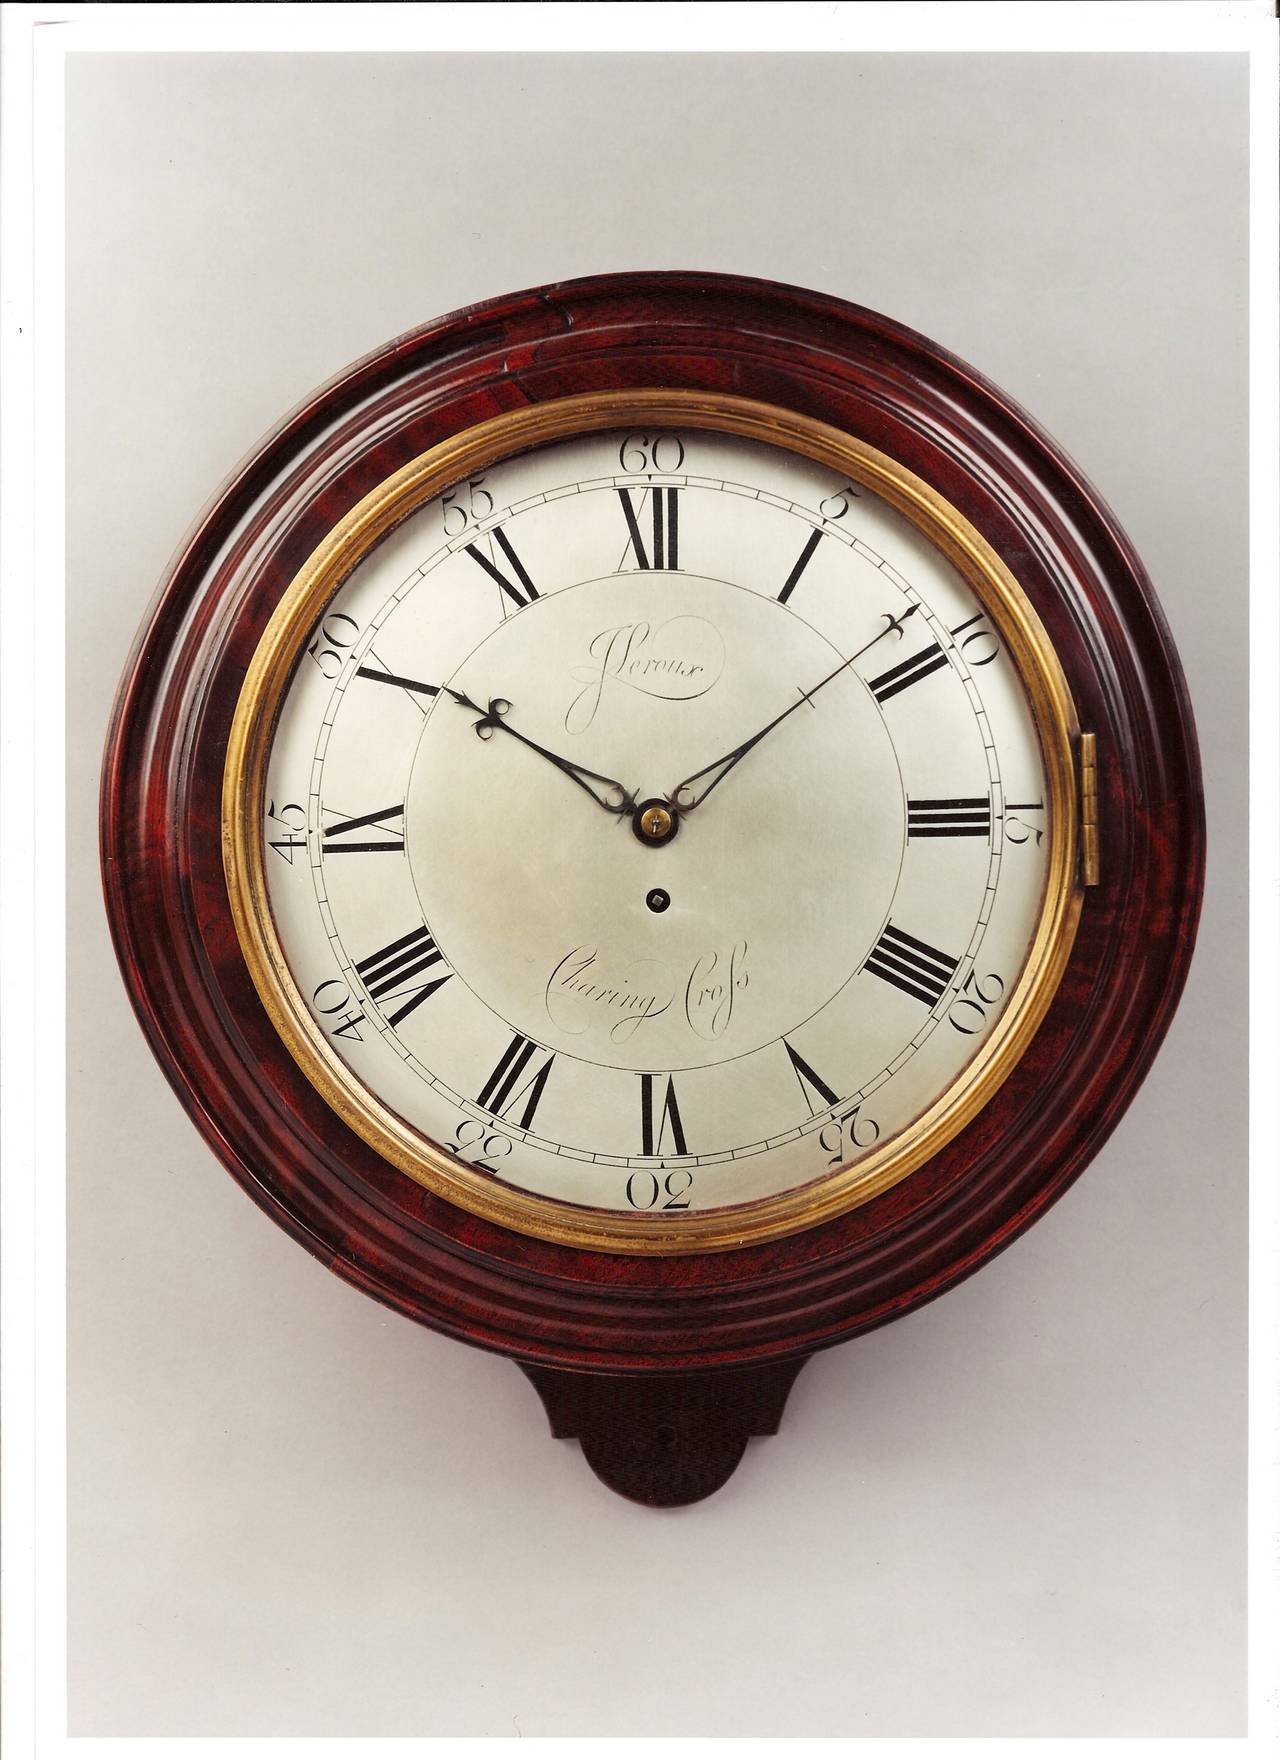 A George III period antique mahogany silvered dial wall timepiece. The 12 inch signed, silvered and engraved dial with blued steel hands, surrounded by the molded wood bezel. The eight day movement with tapered plates and anchor escapement.

John